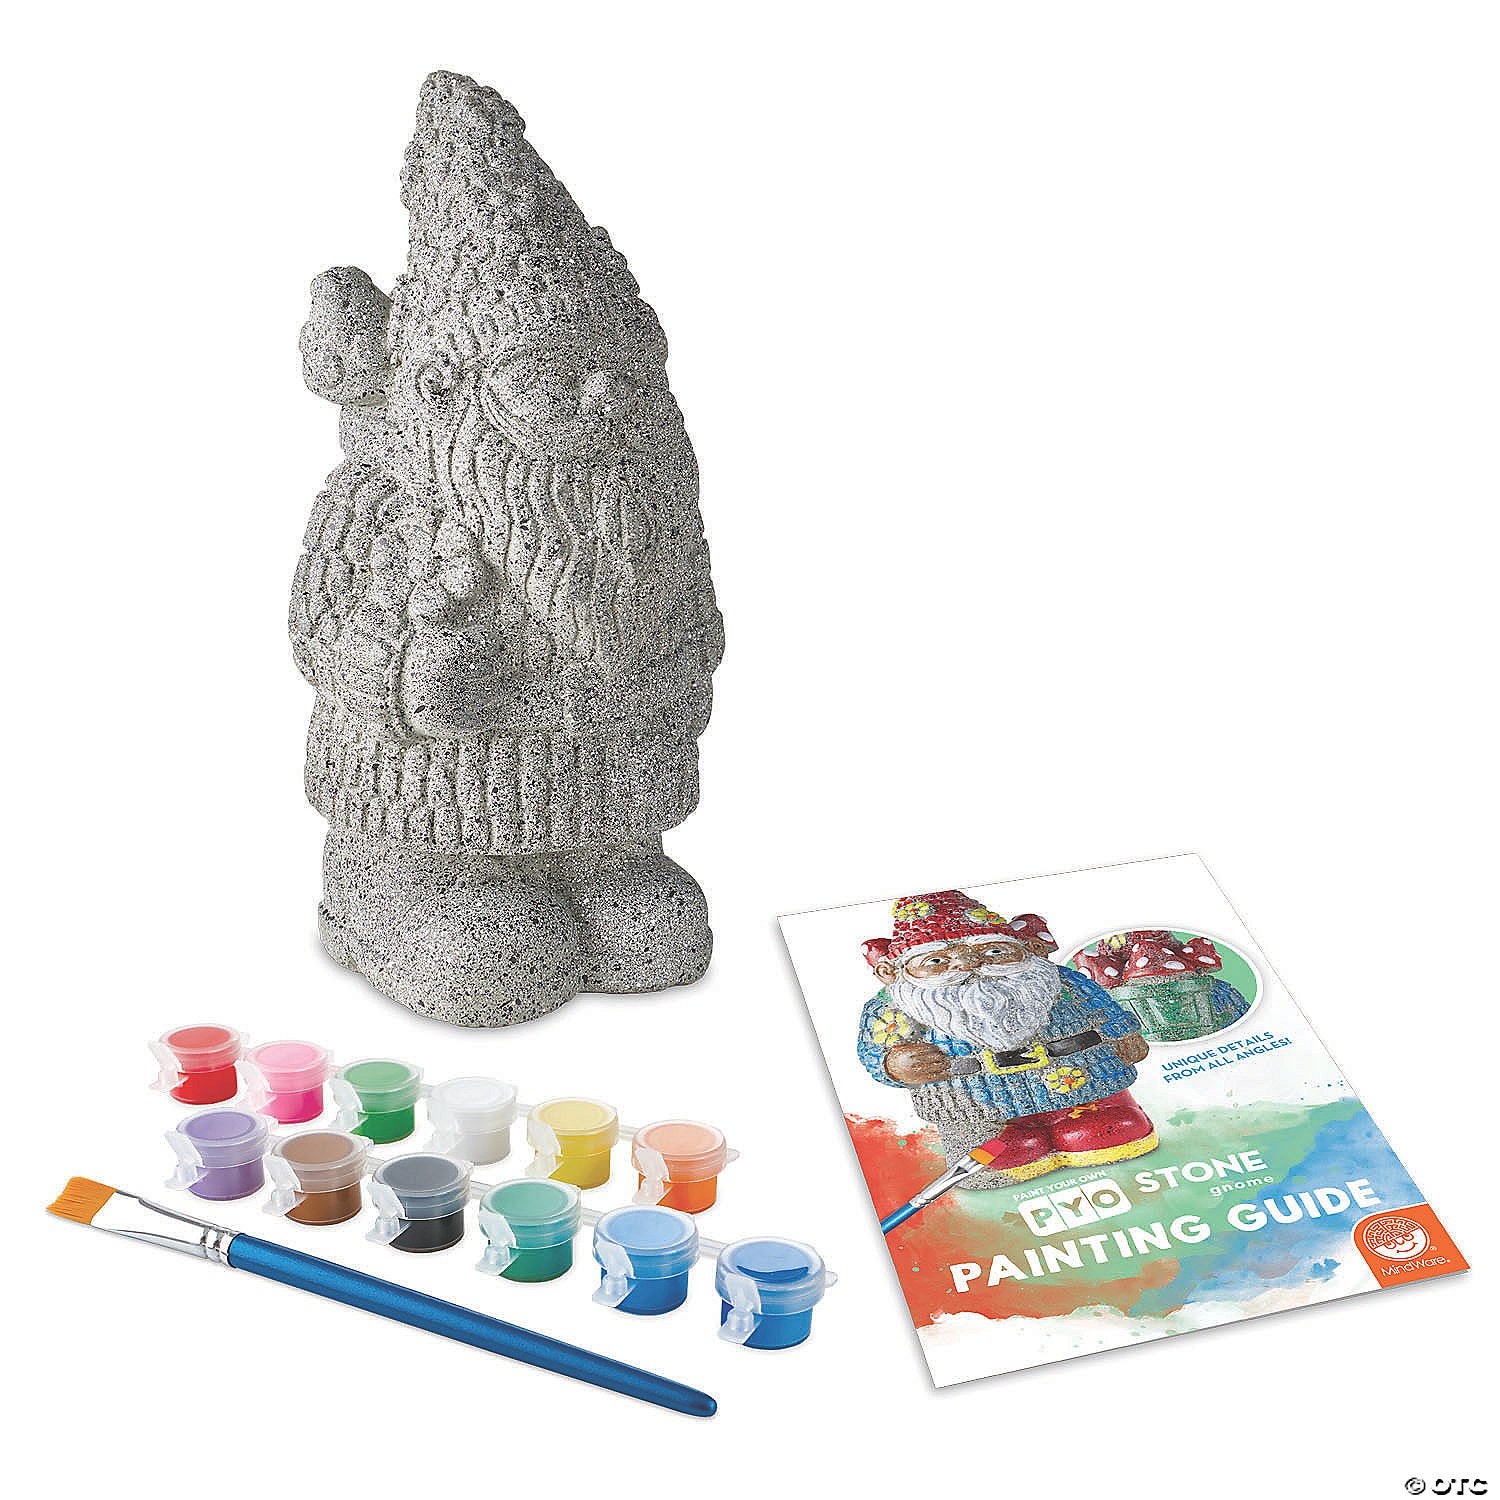 PAINT YOUR OWN STONE GNOME